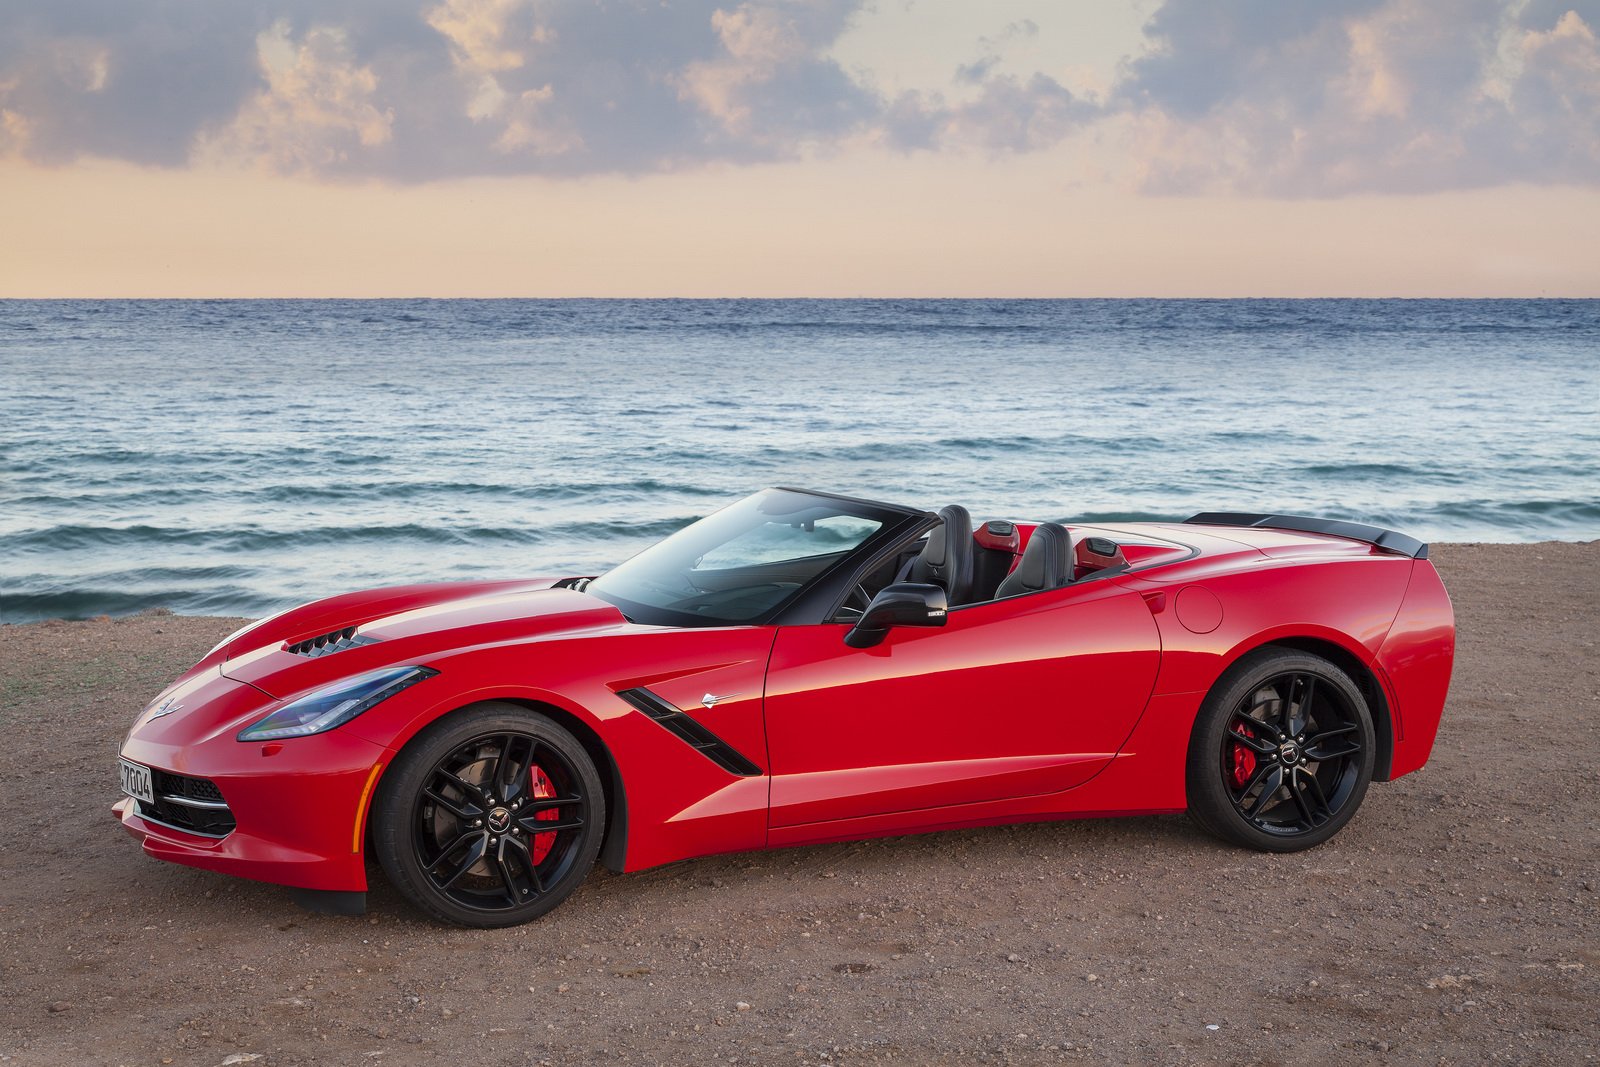 2015, Chevy, Chevrolet, Corvette, Stingray, Convertible, Cabriolet, Red, Us...